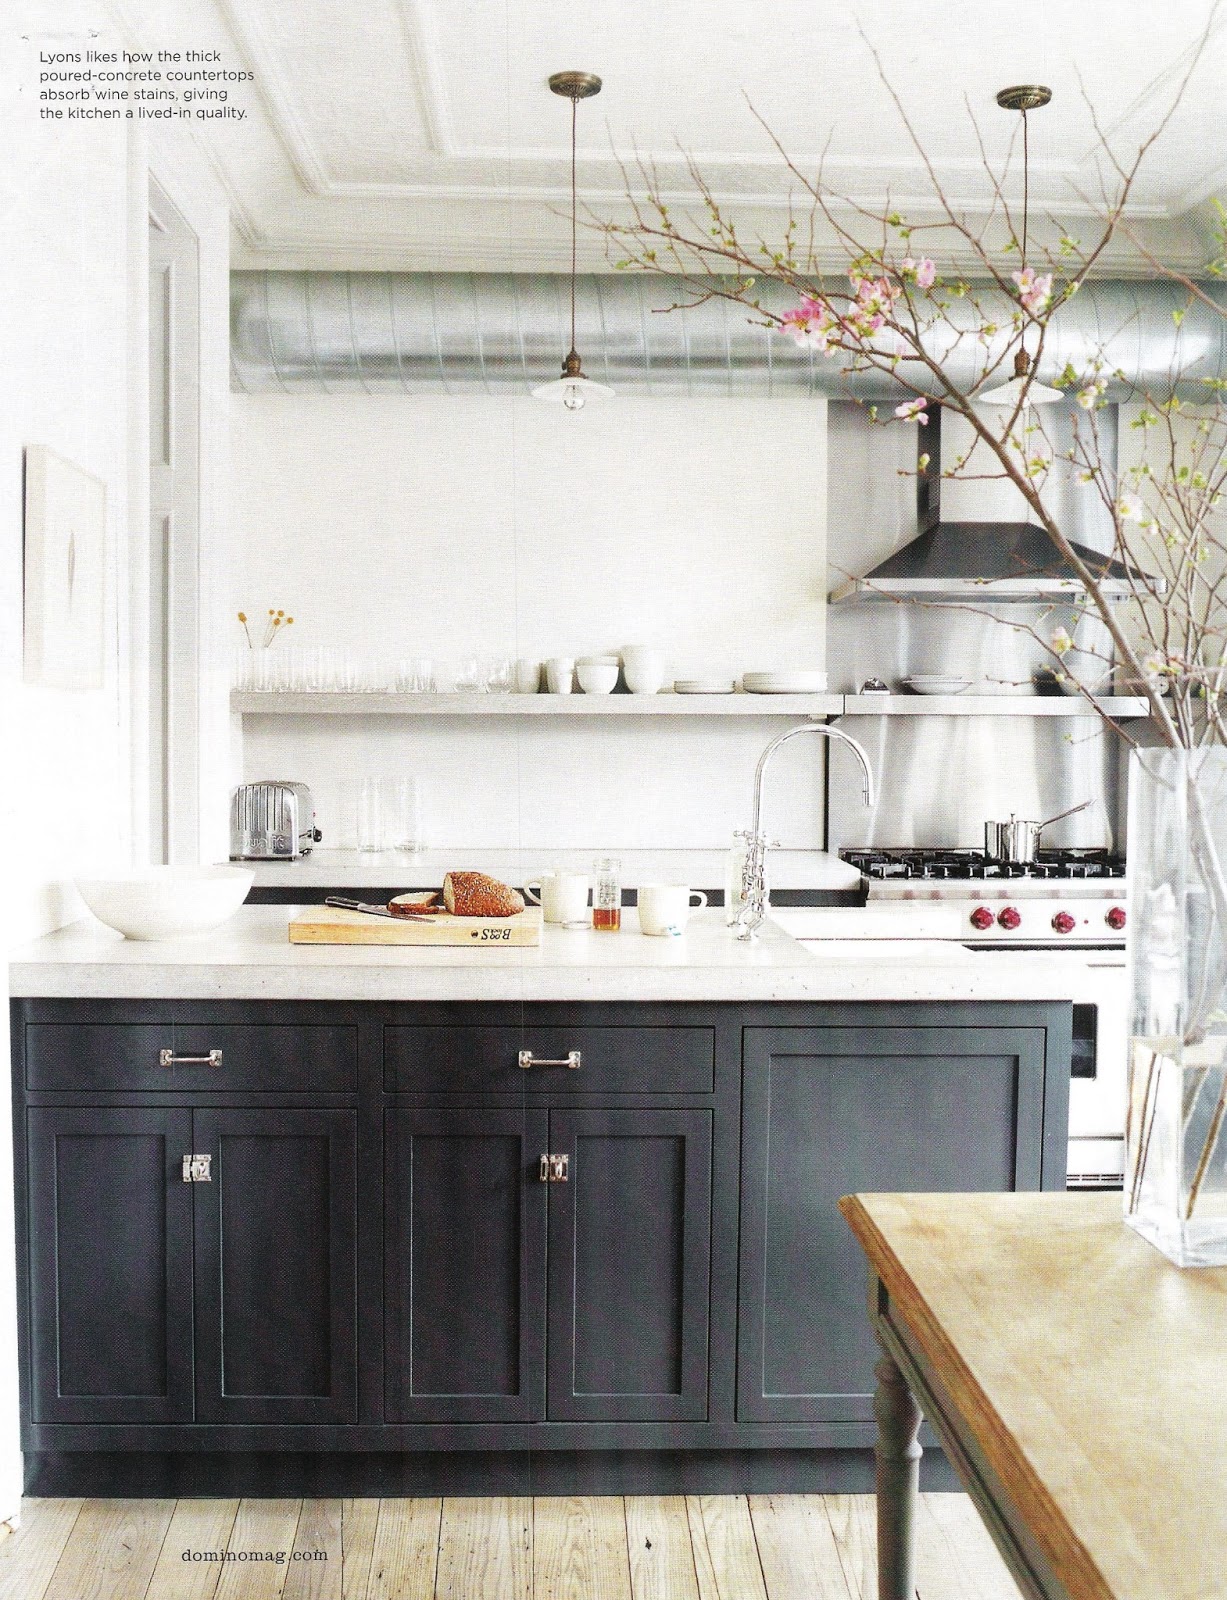 Kitchens With Open Shelving A Flippen Life